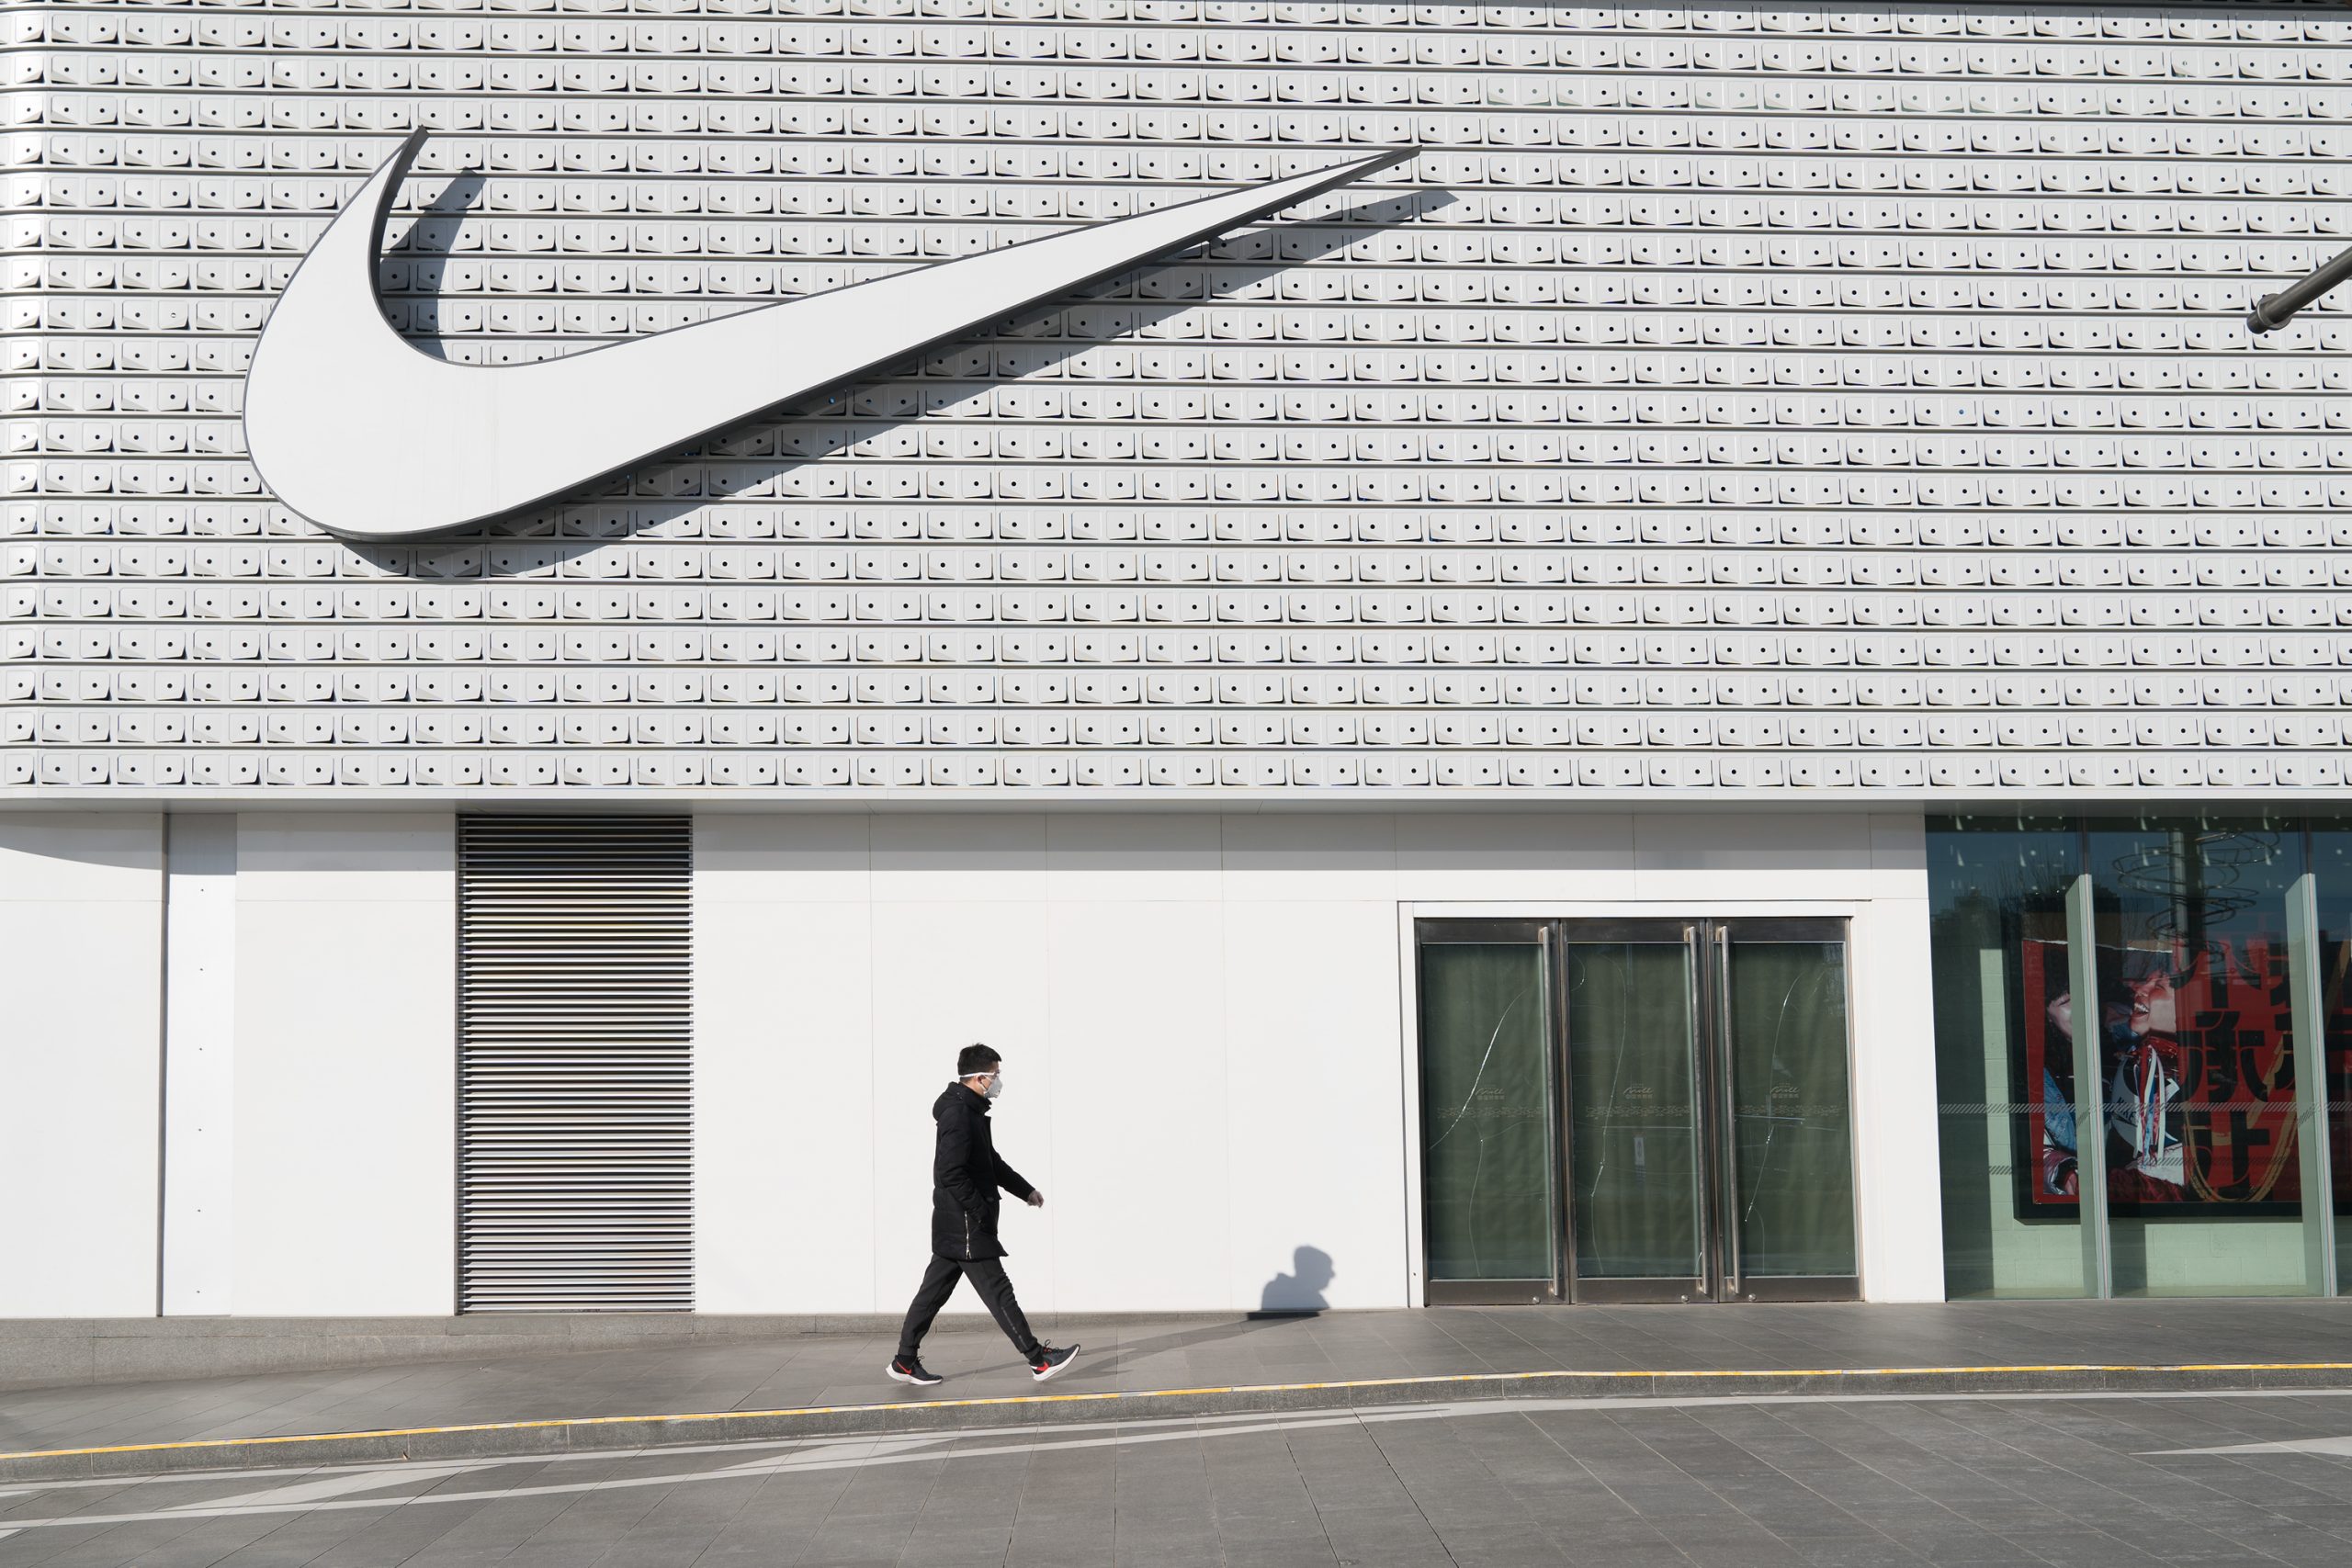 nike fiscal 2022 q2 results earnings revenue